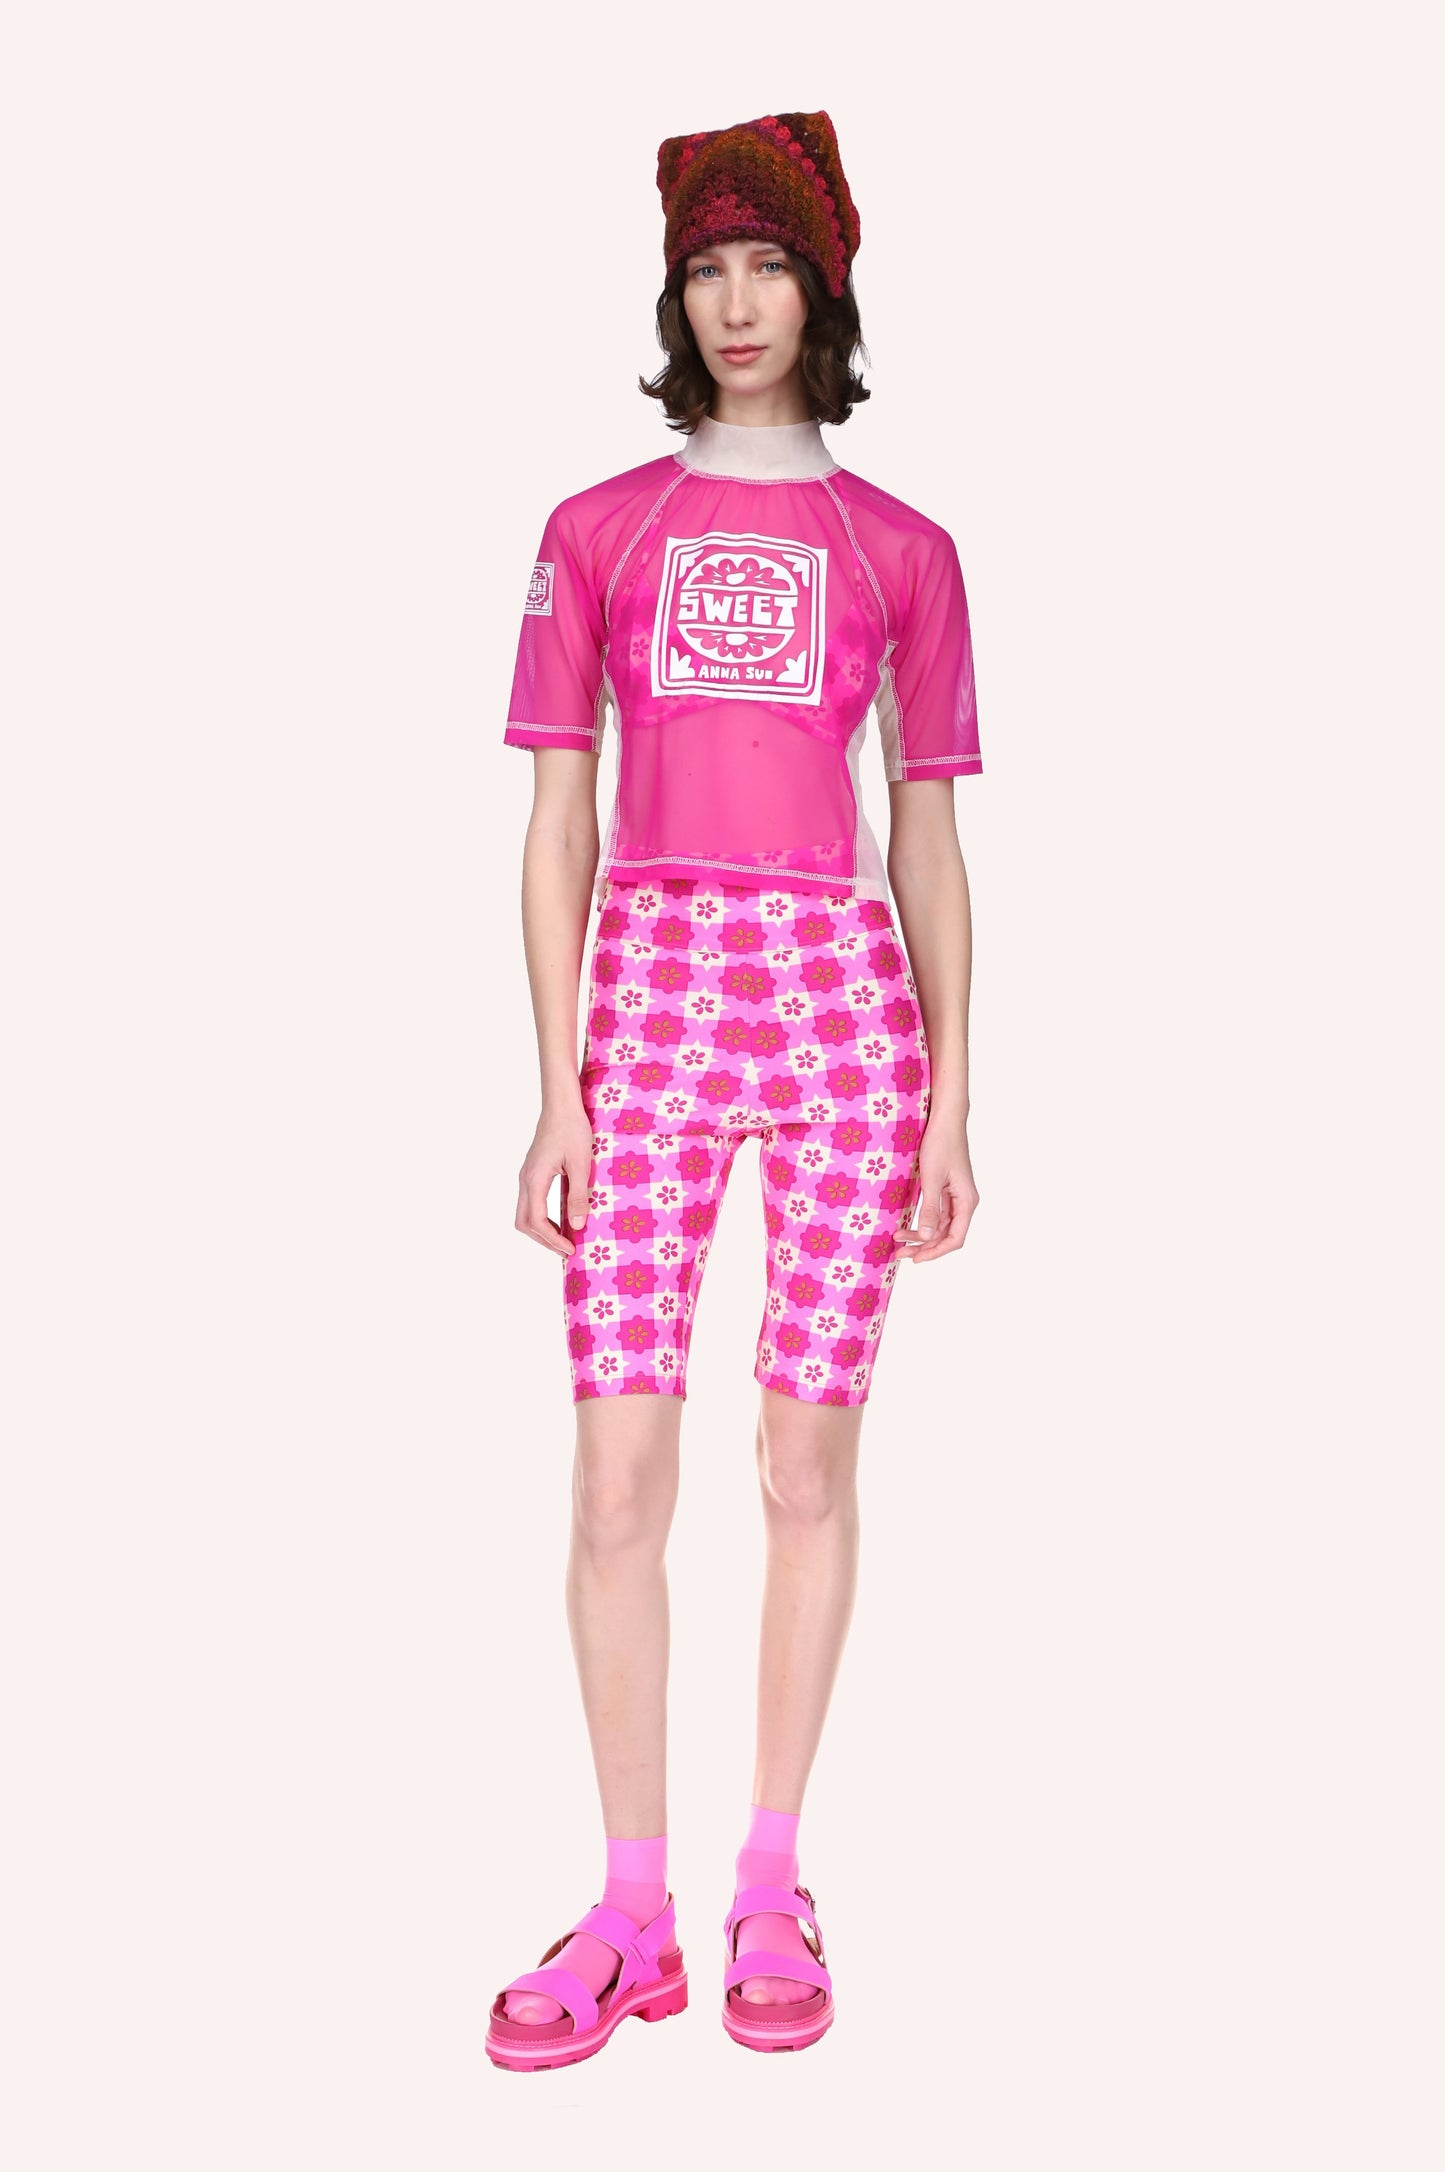 Utopian Gingham Bike Shorts Neon Pink at the hips high and very tight